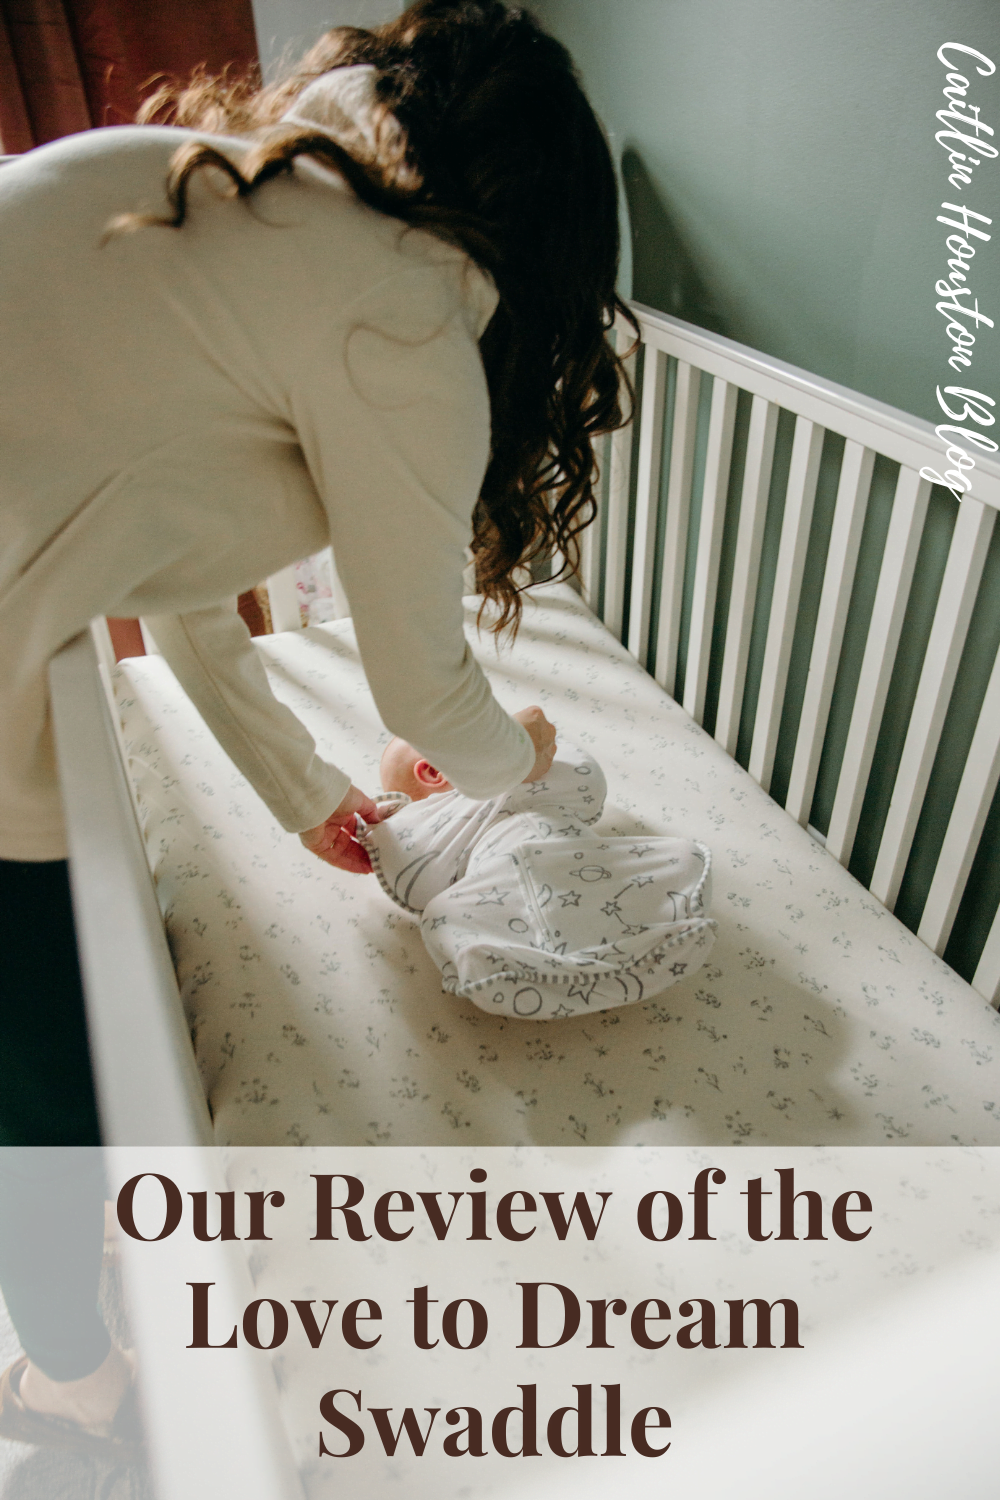 Our Review of the Love to Dream Swaddle